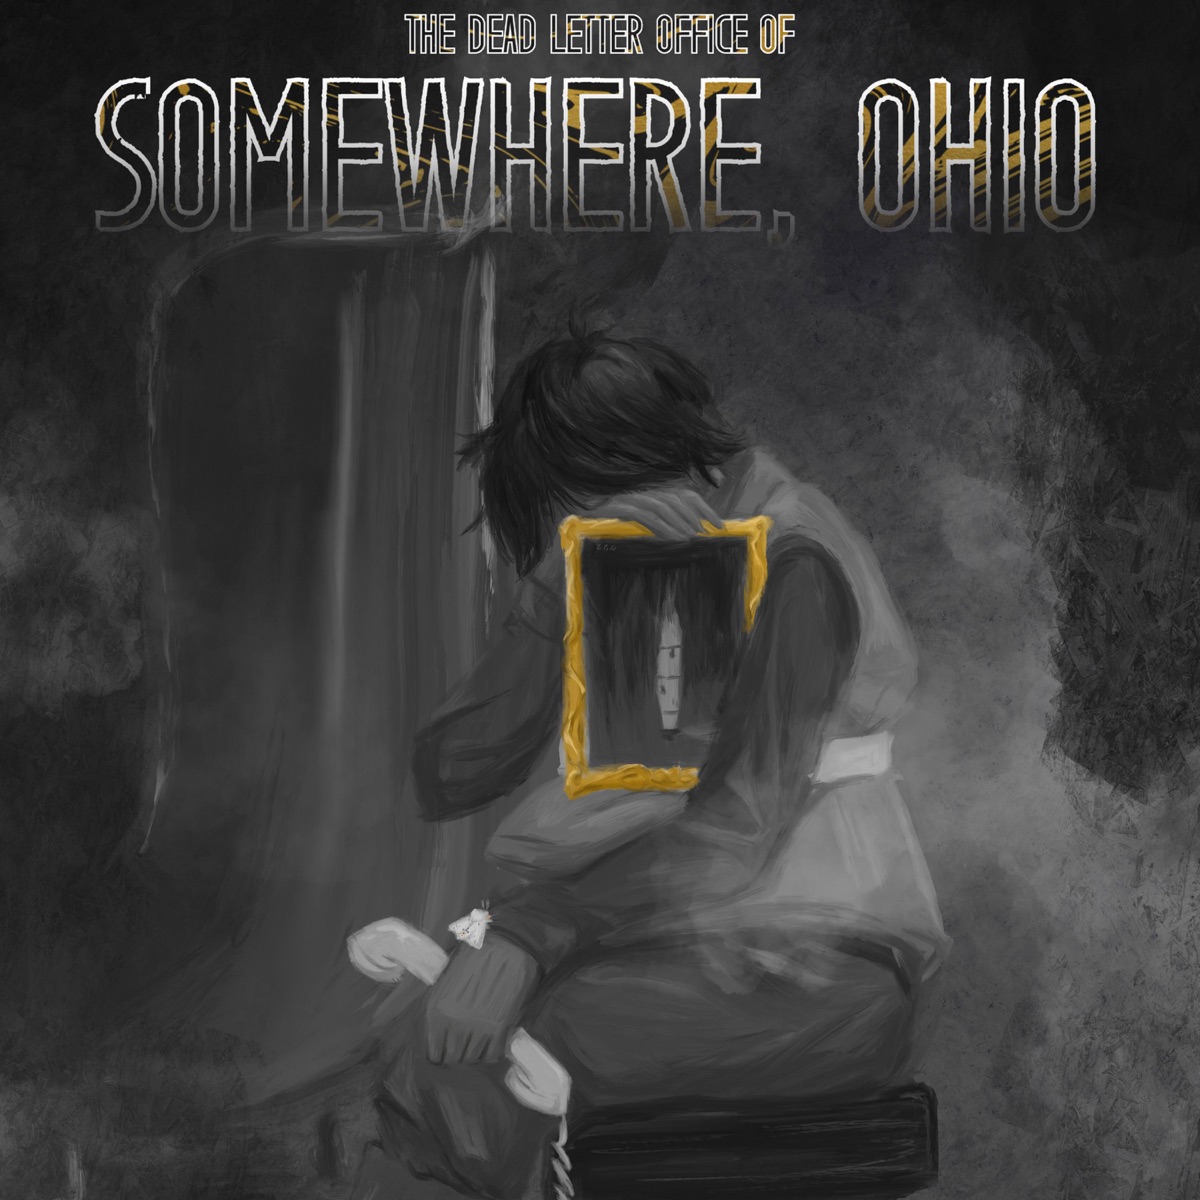 the Dead Letter Office of Somewhere, Ohio – Podcast – Podtail